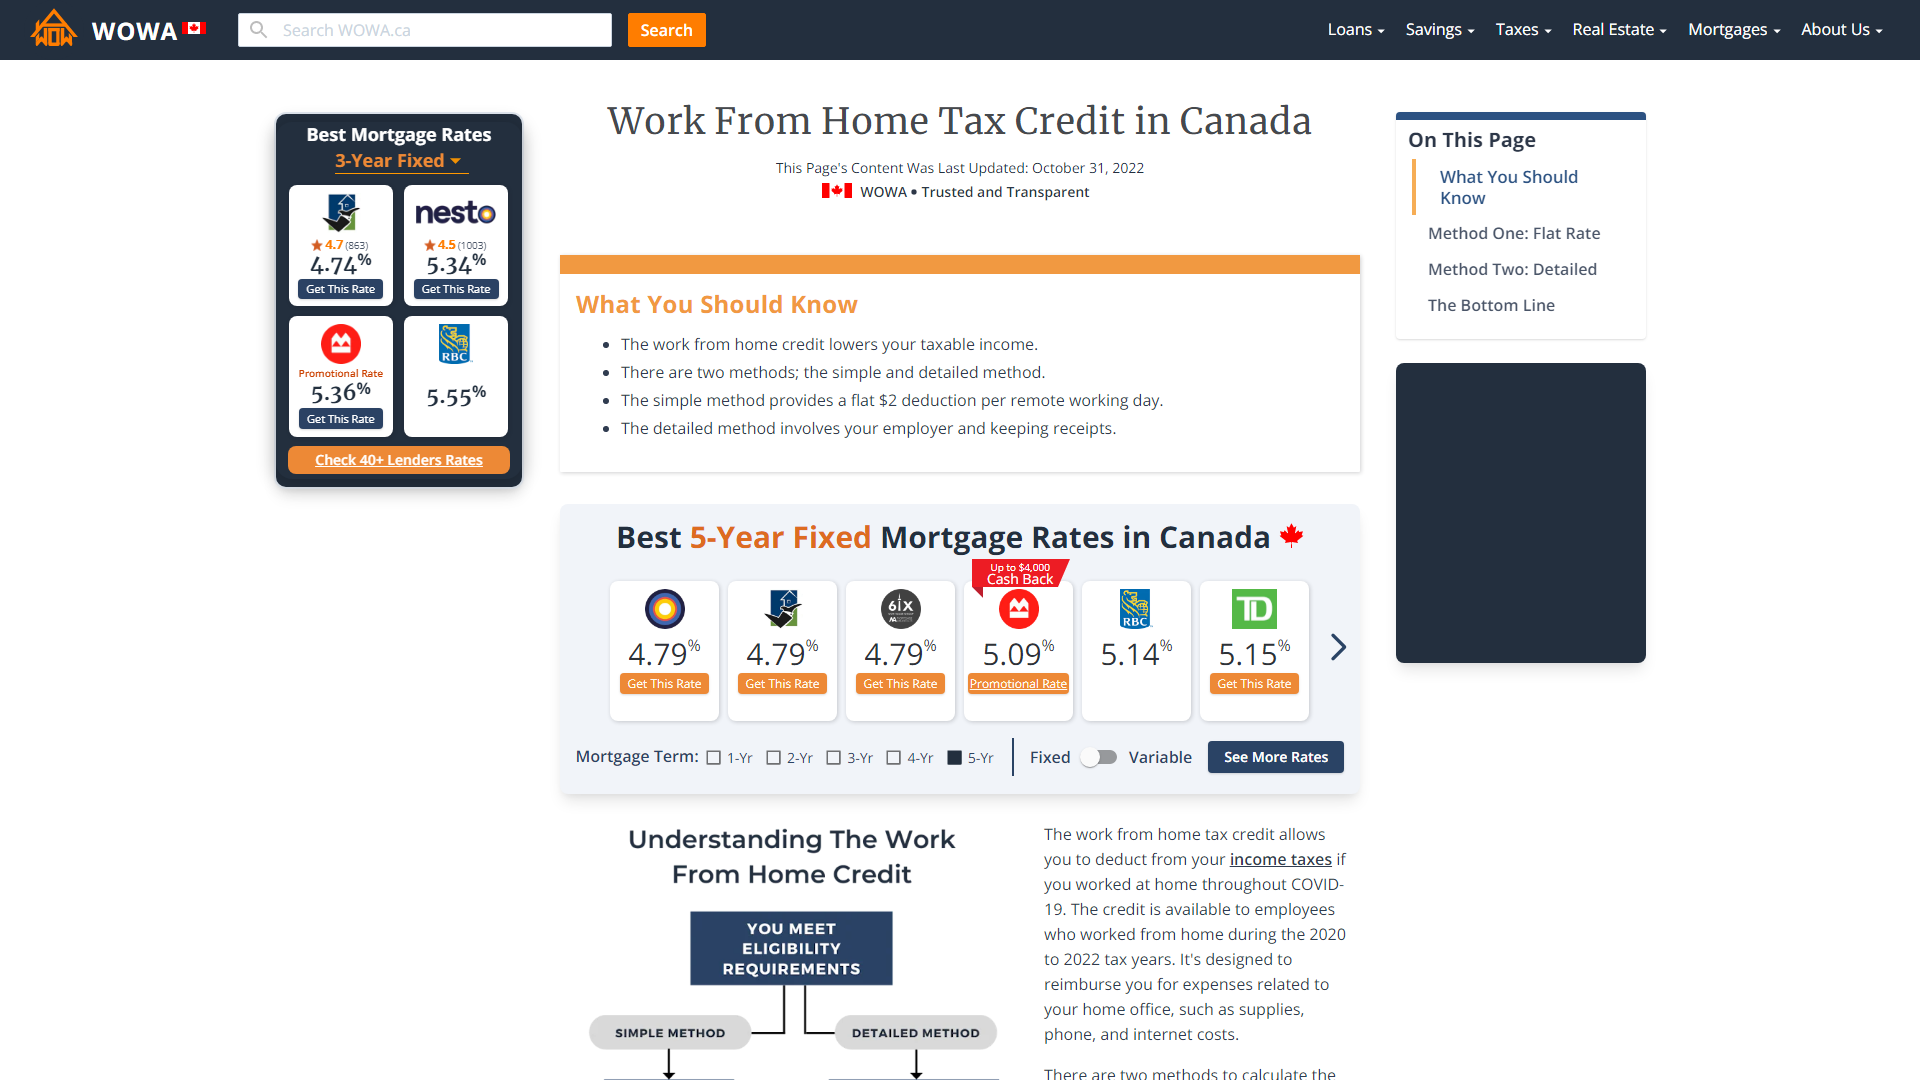 work-from-home-tax-credit-guide-wowa-ca